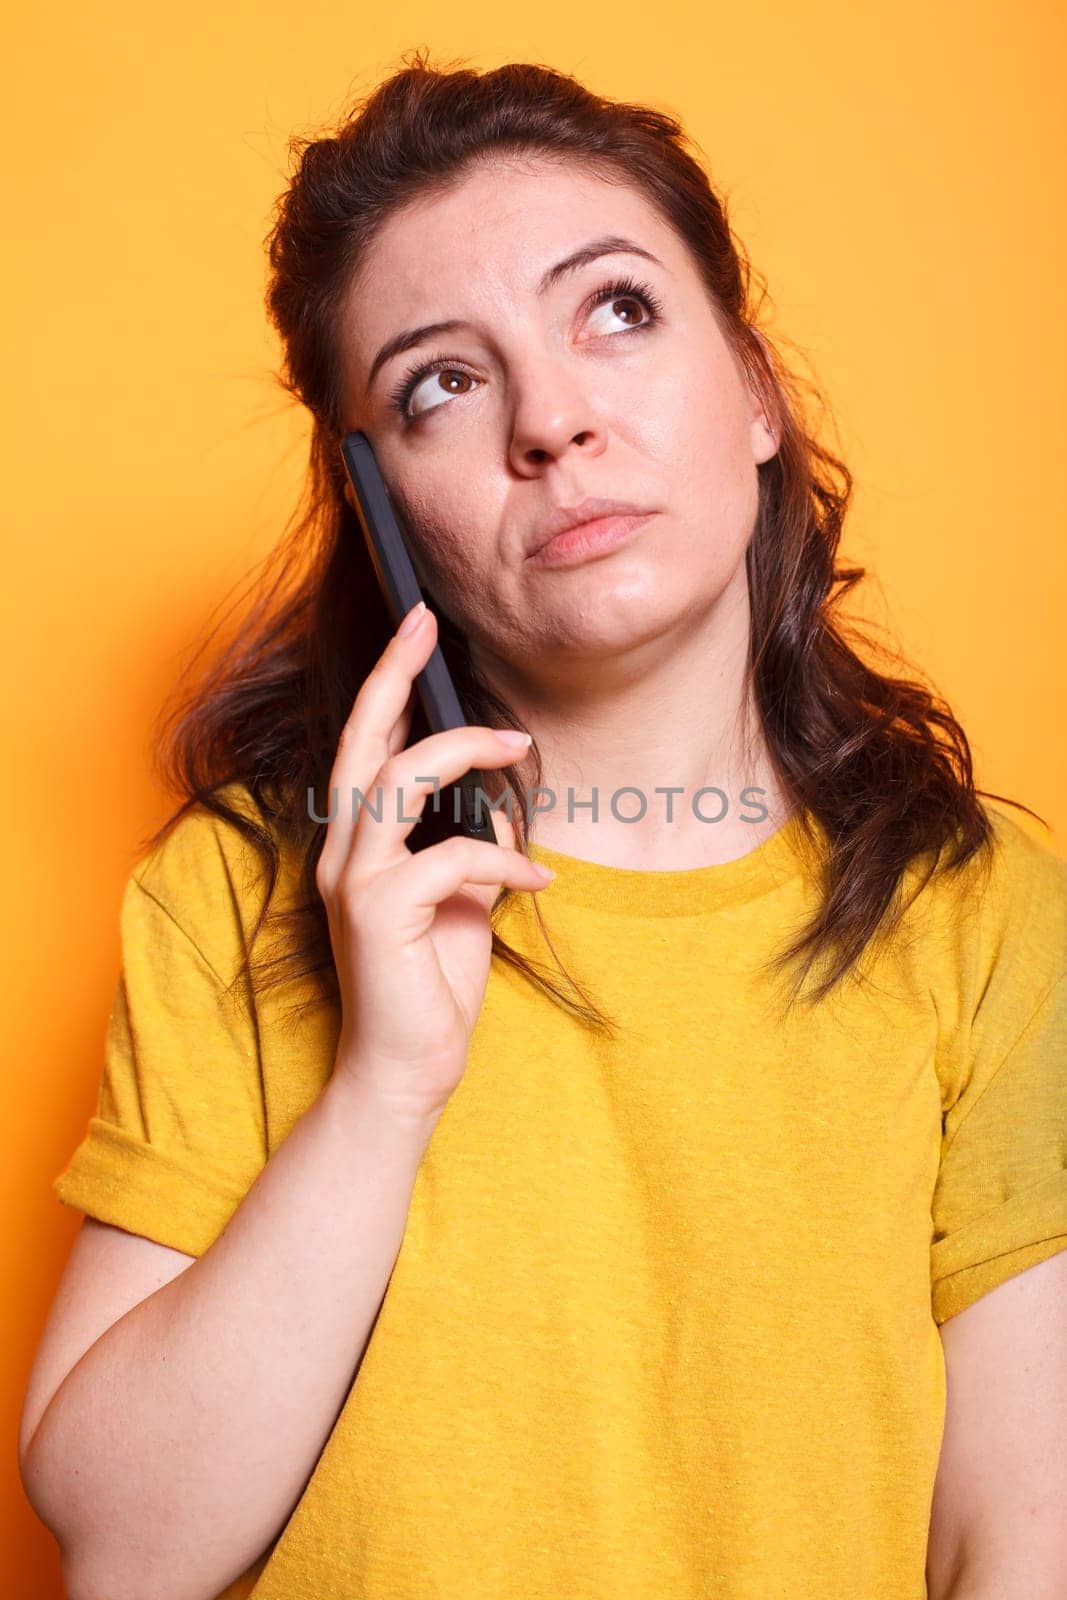 Portrait of female individual having important phone call conversation in front of isolated background. Close-up of woman in thoughts while talking on her mobile device with friends and family.